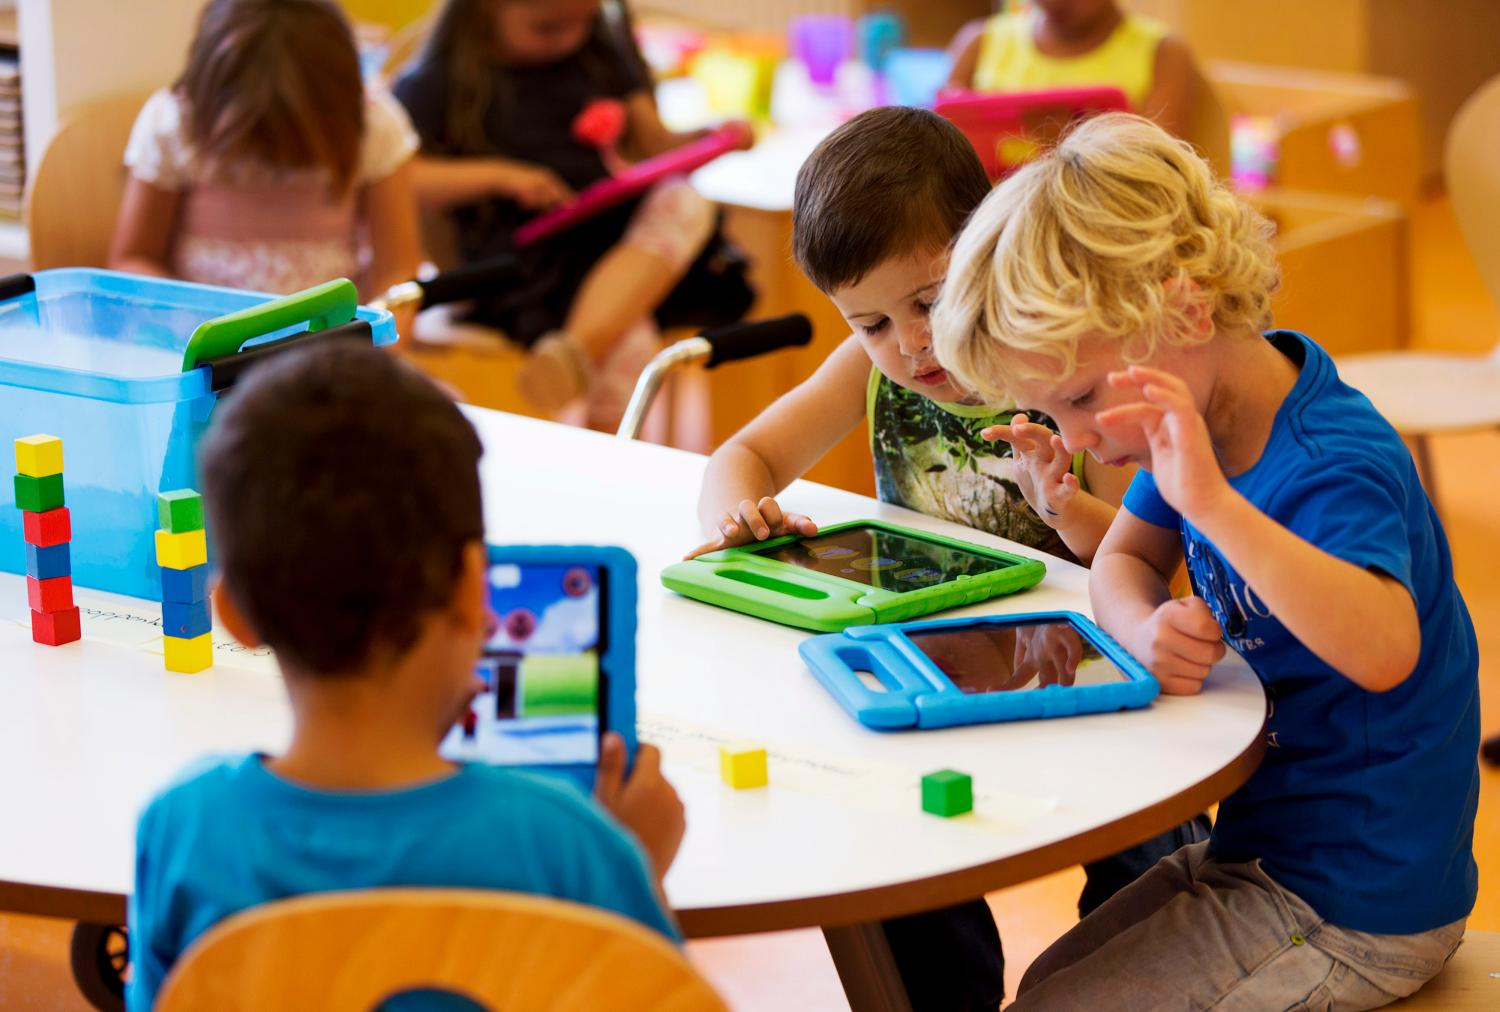 Students play with their iPads at the Steve Jobs school in Sneek